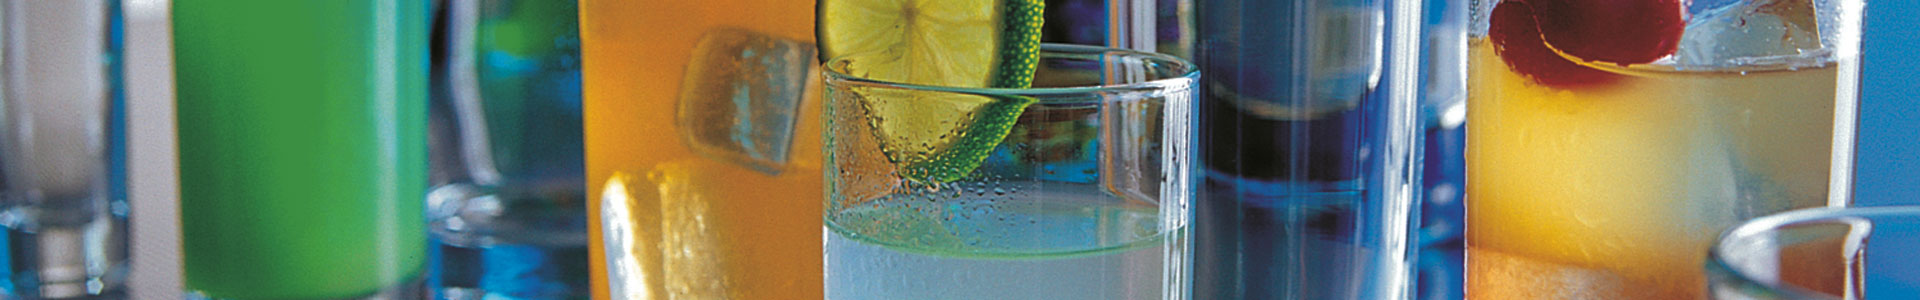 Arcoroc drinking glasses with colorful cocktails